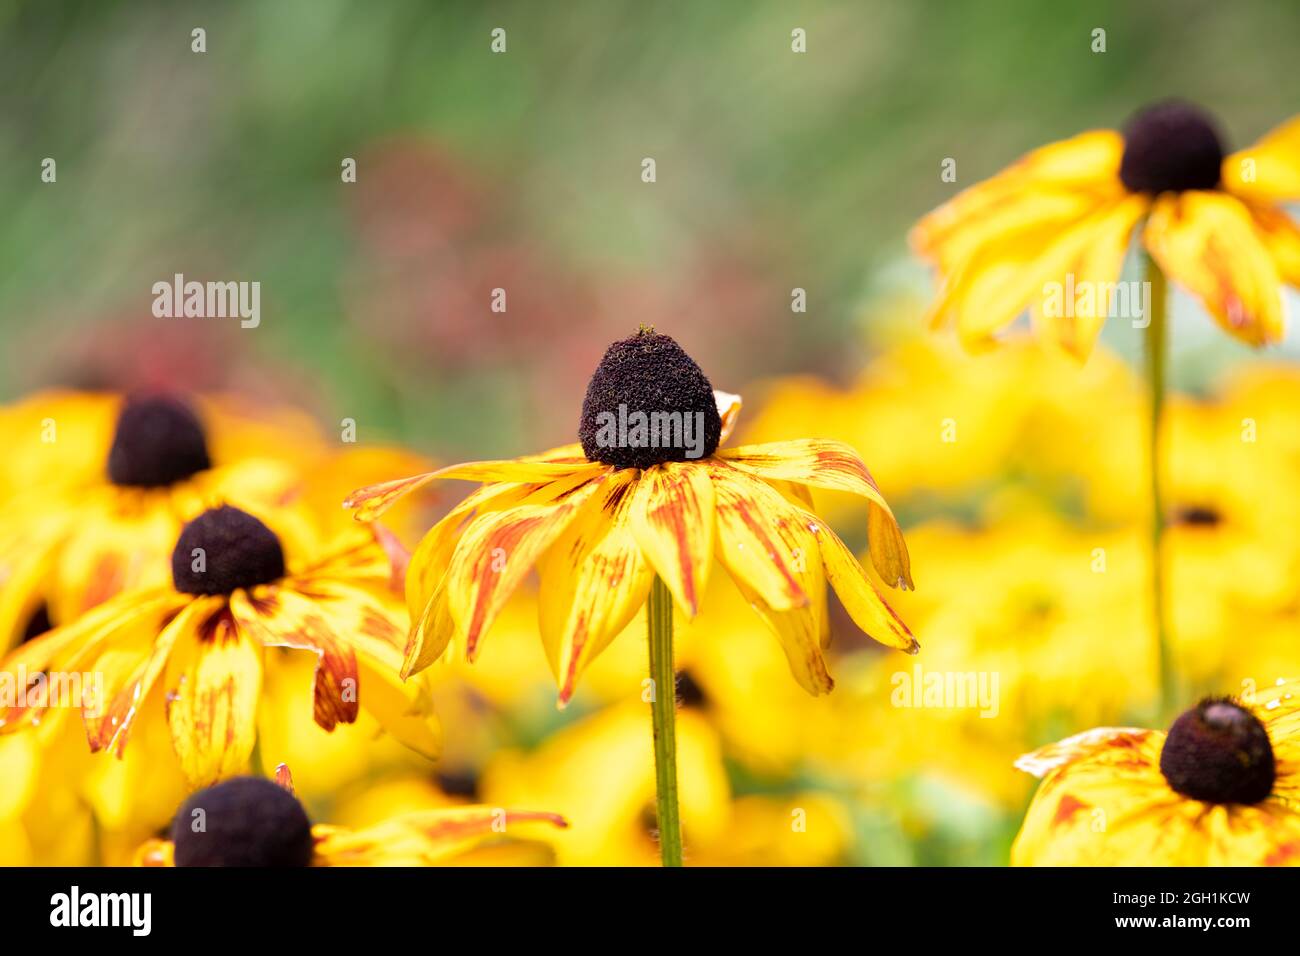 Black-eyed Susan flowers in bloom with a green background Stock Photo